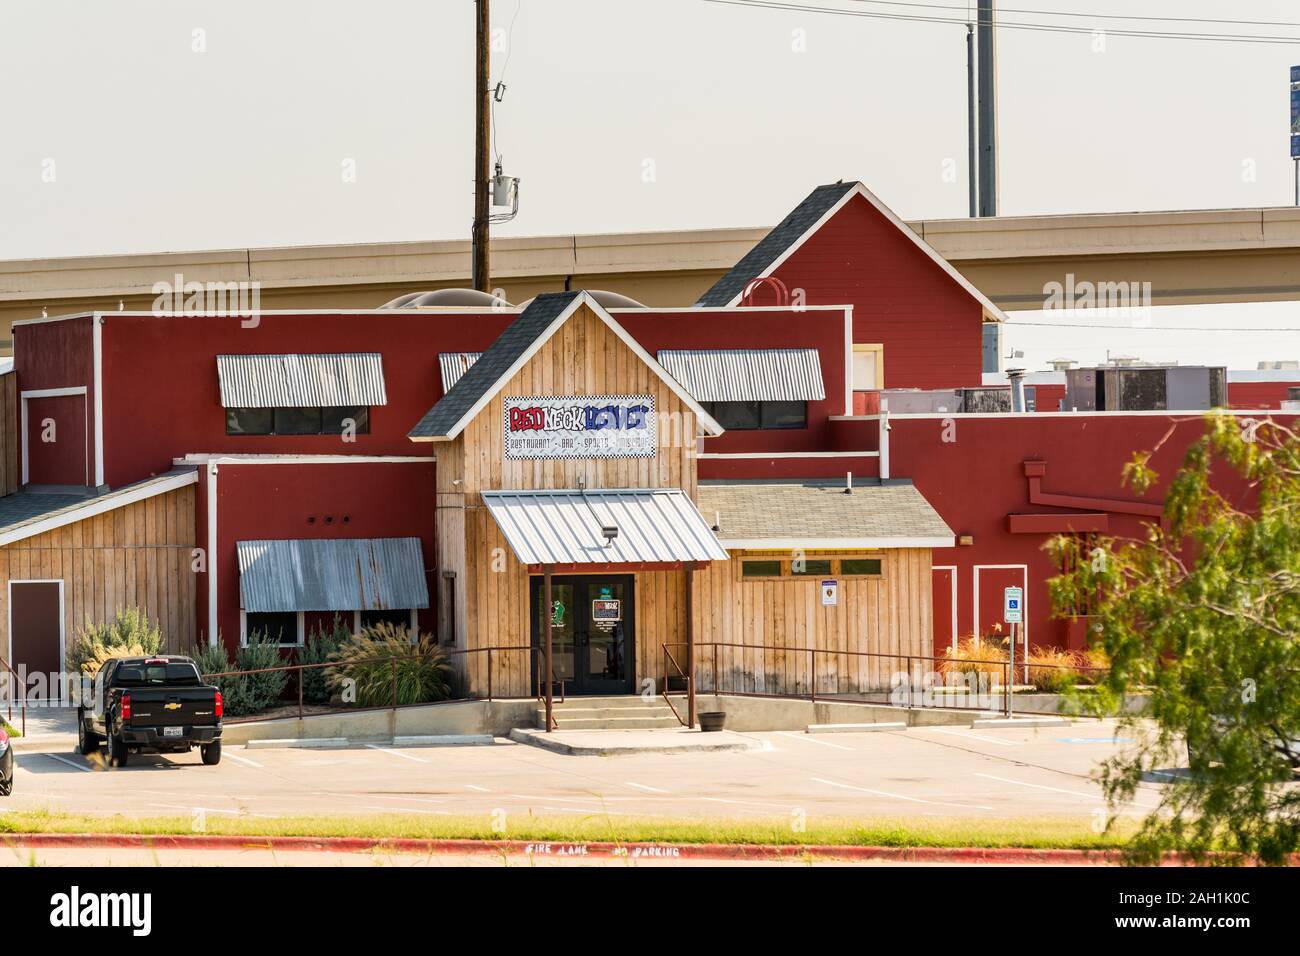 Wooden buildings of restaurants in uptown of Dallas Fort Worth, Texas, USA. Stock Photo